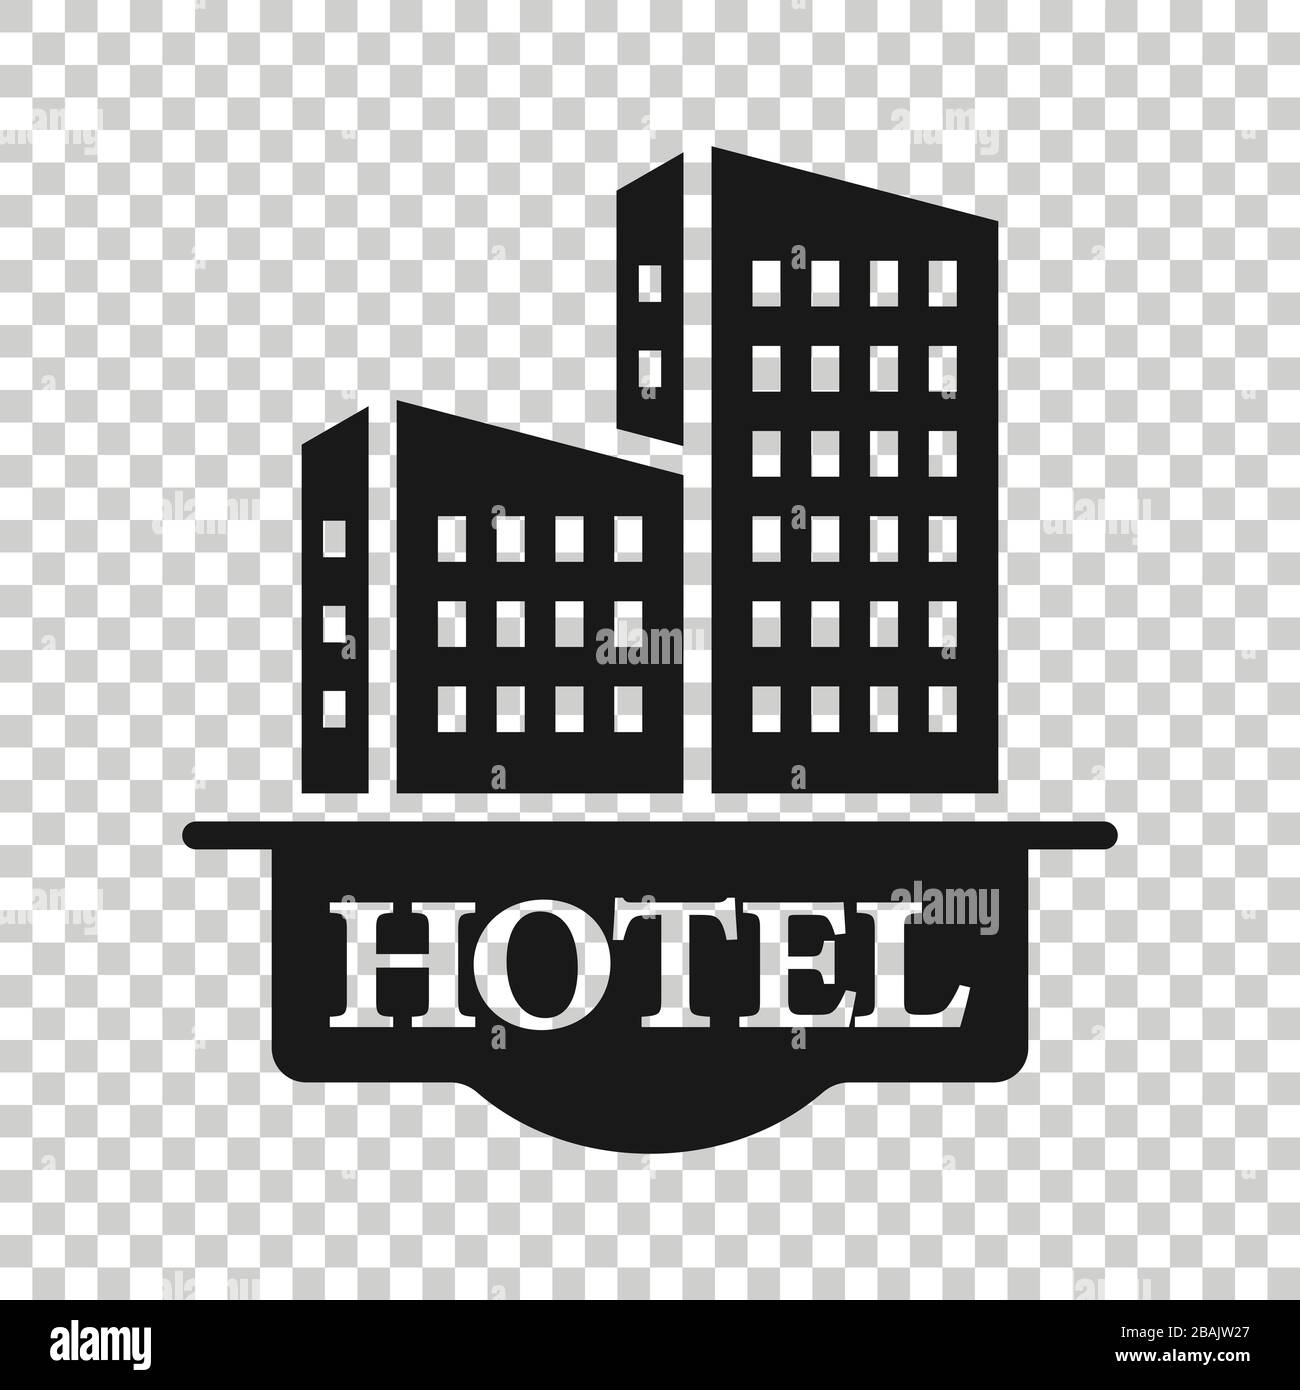 Hotel sign icon in flat style. Inn building vector illustration on white isolated background. Hostel room business concept. Stock Vector